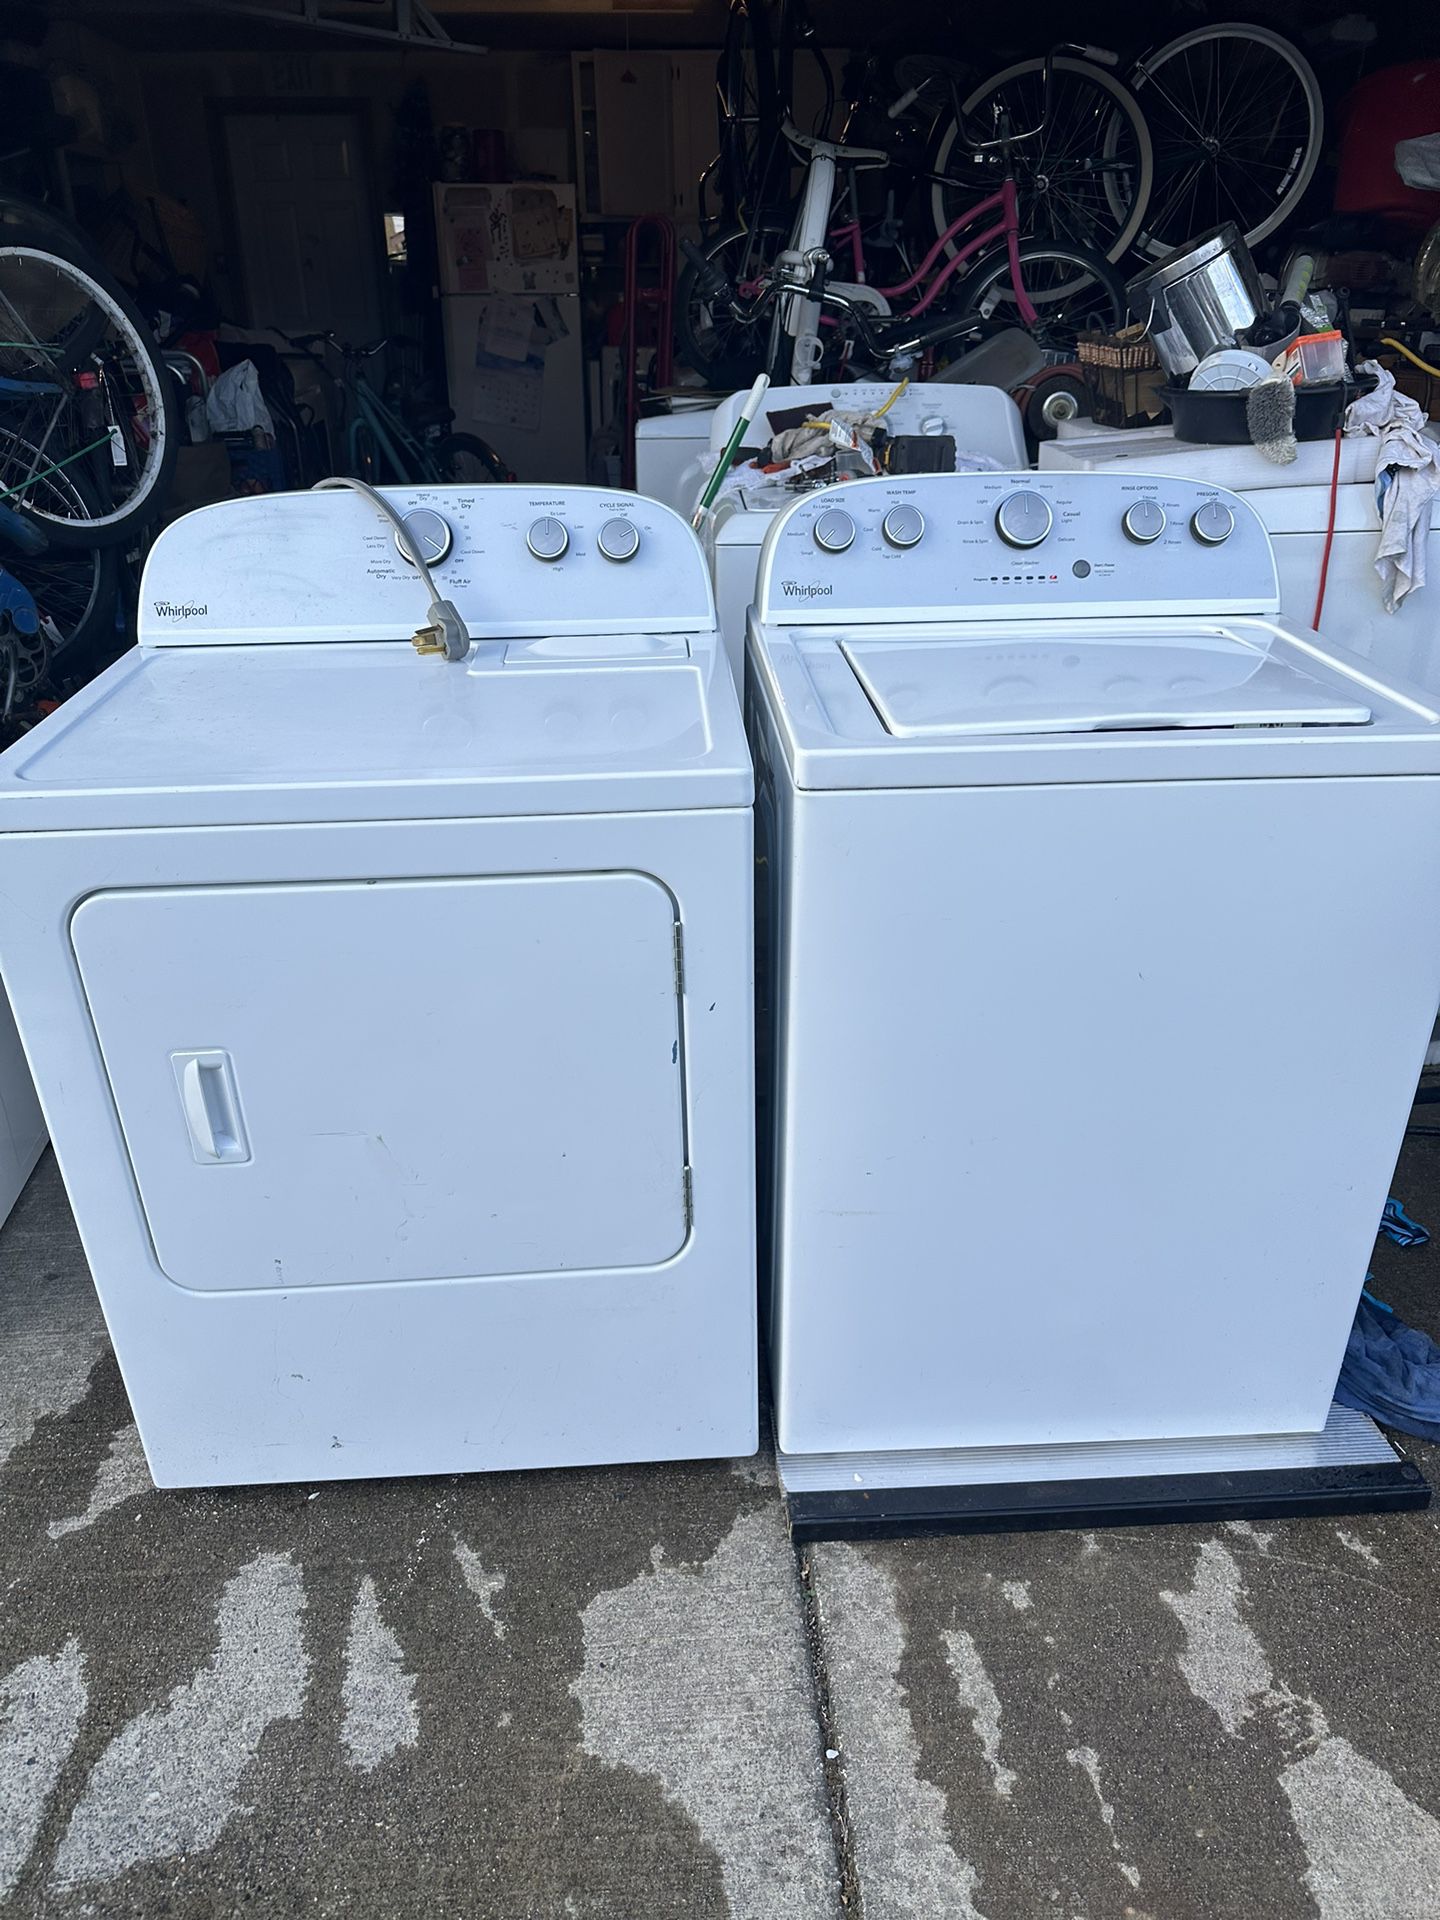 Whirlpool Washer And Dryer 